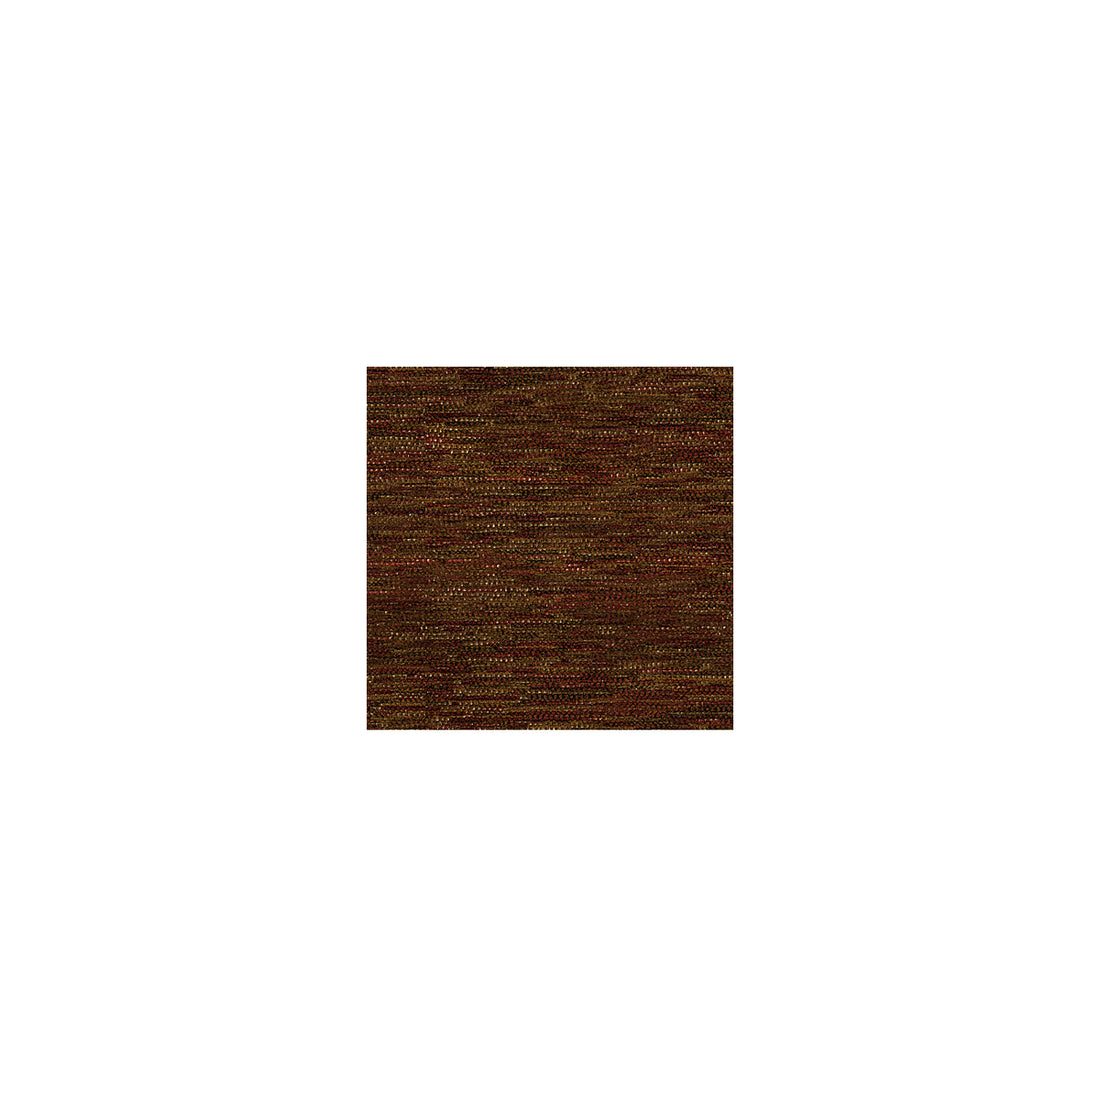 Dune Wood fabric in spice color - pattern 30136.24.0 - by Kravet Smart